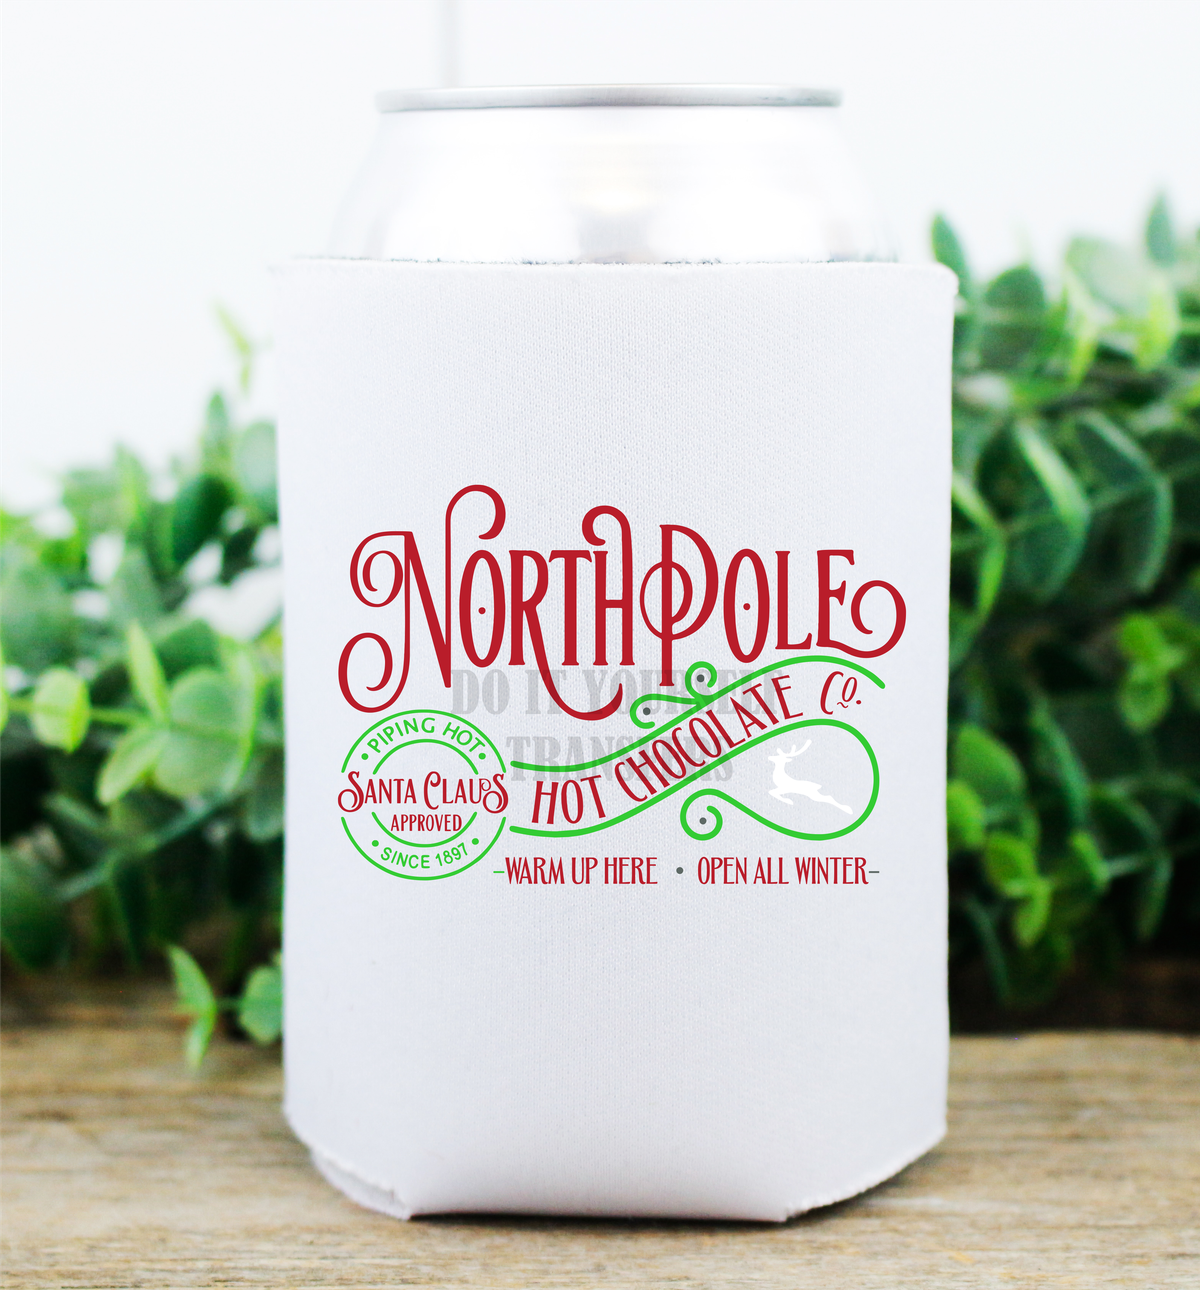 Northpole Santa Claus apprived Hot Chocolate co Christmas Winter  / size 3x2 DTF TRANSFERPRINT TO ORDER